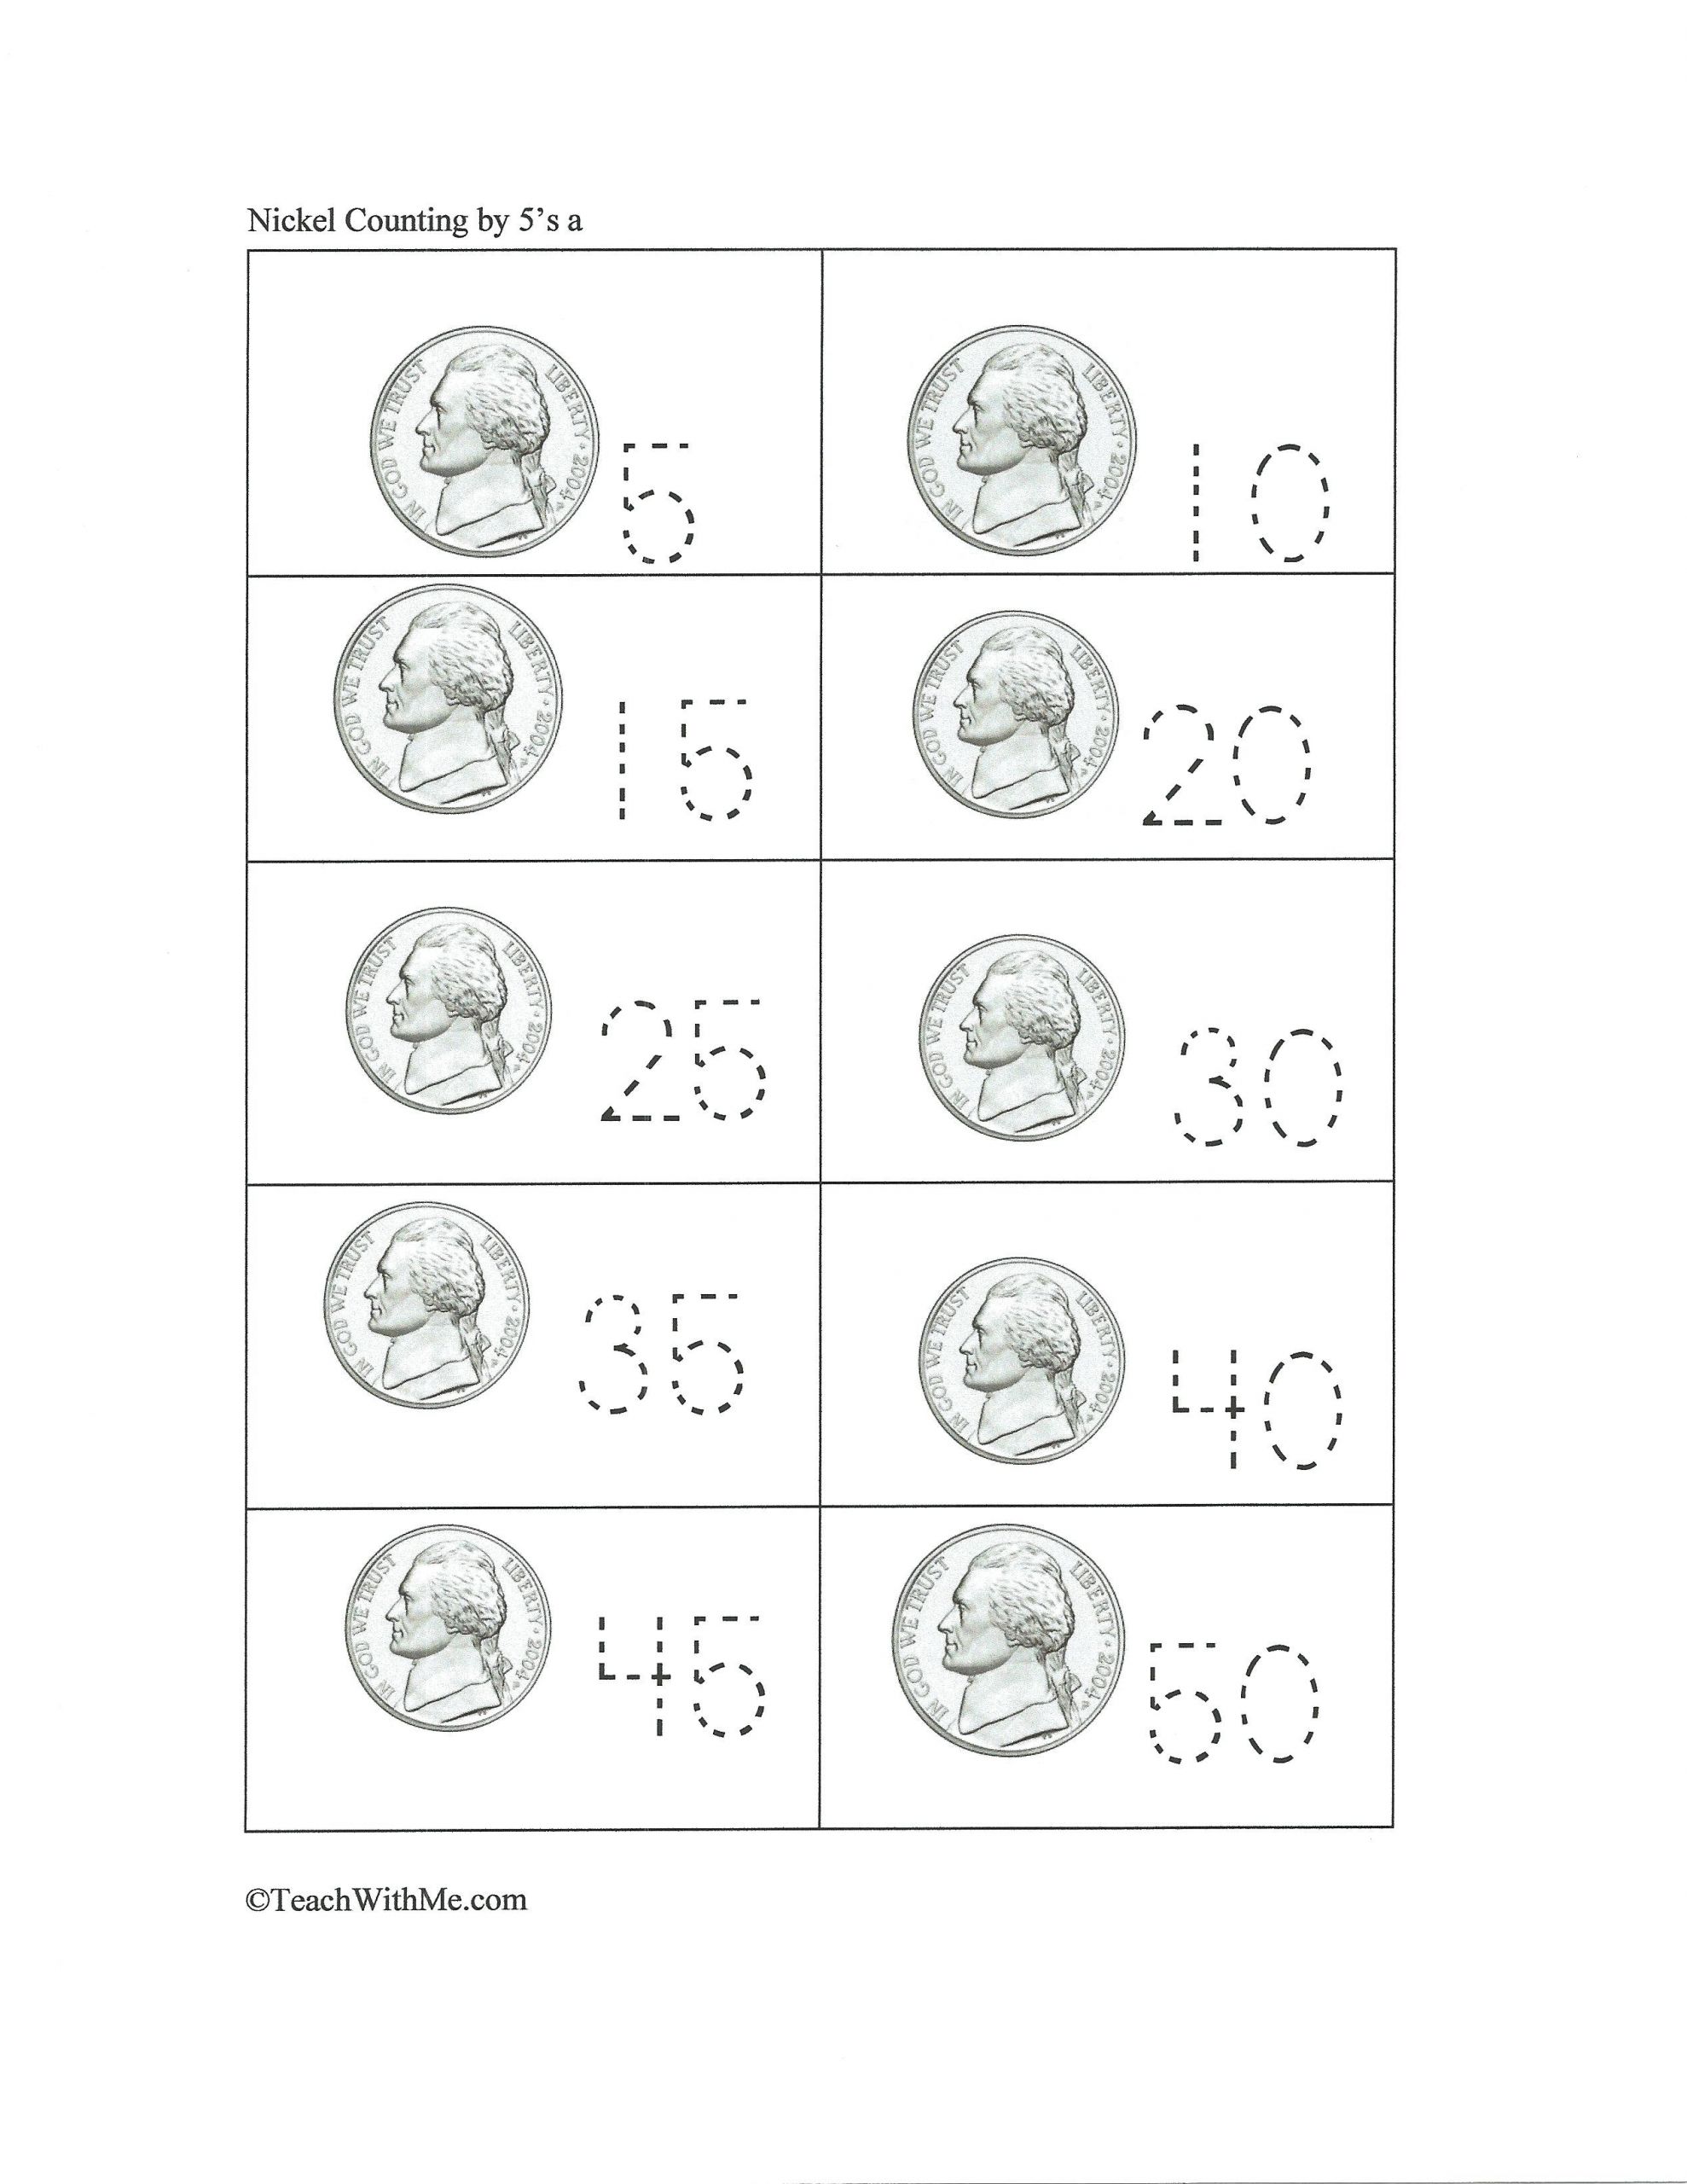 5 nickels math counting nickels by free template mathway unblocked